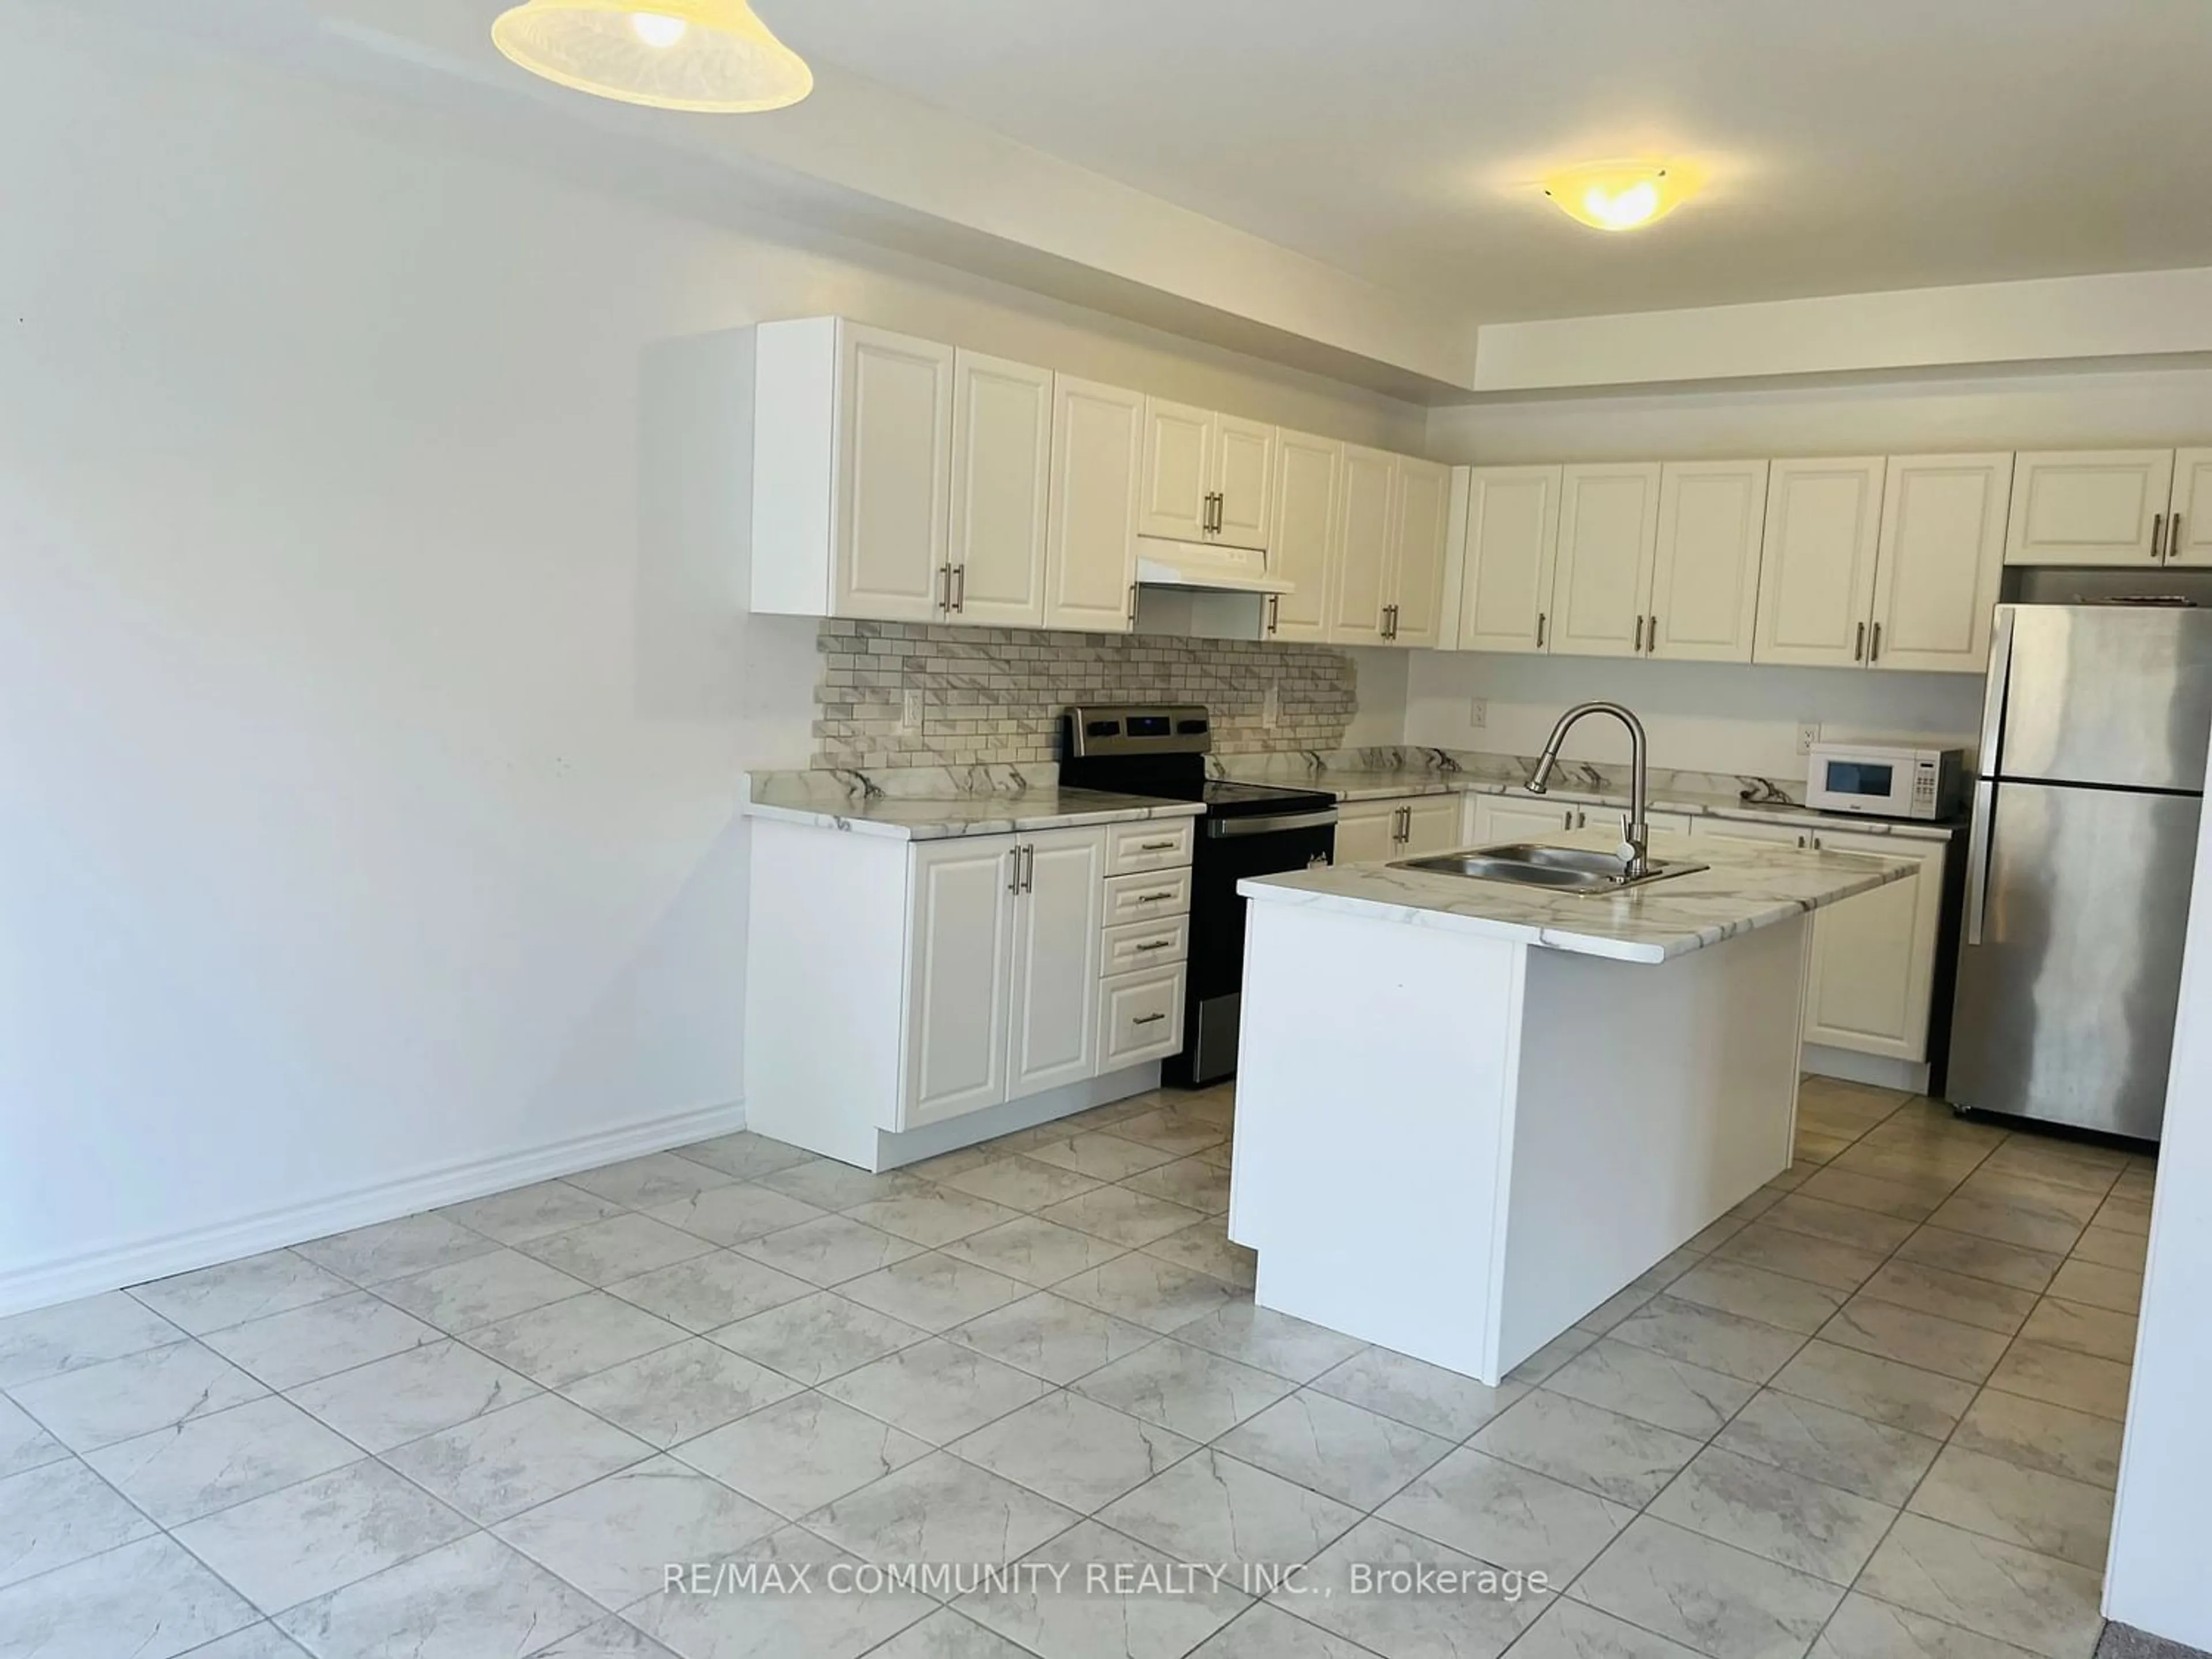 Standard kitchen for 157 Werry Ave, Southgate Ontario N0C 1B0